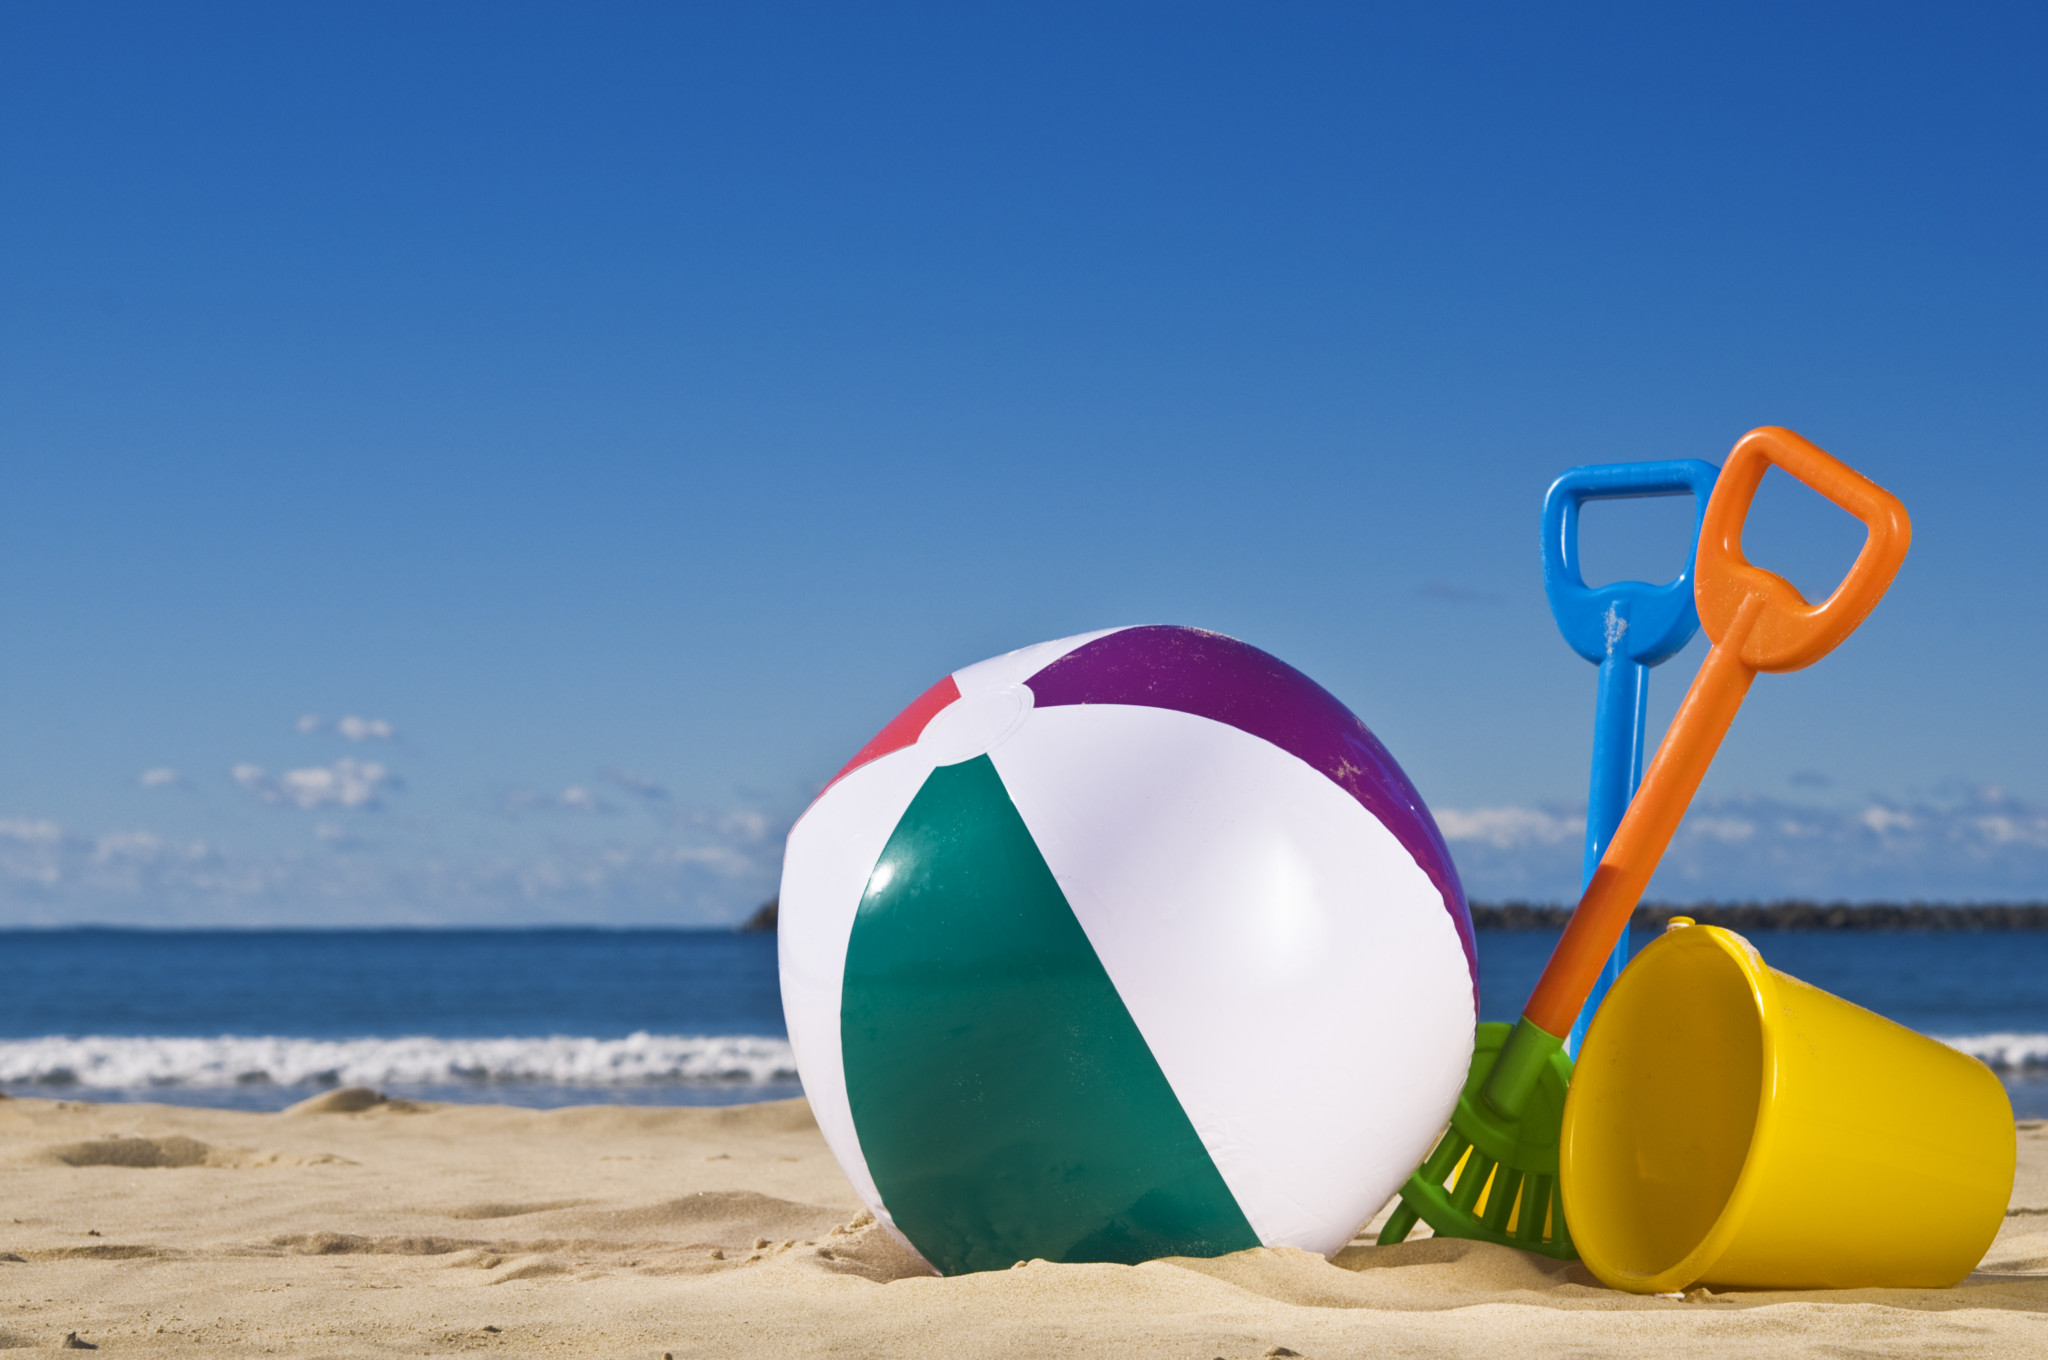 Day at the beach with a beach ball, spade and bucket in the foreground.